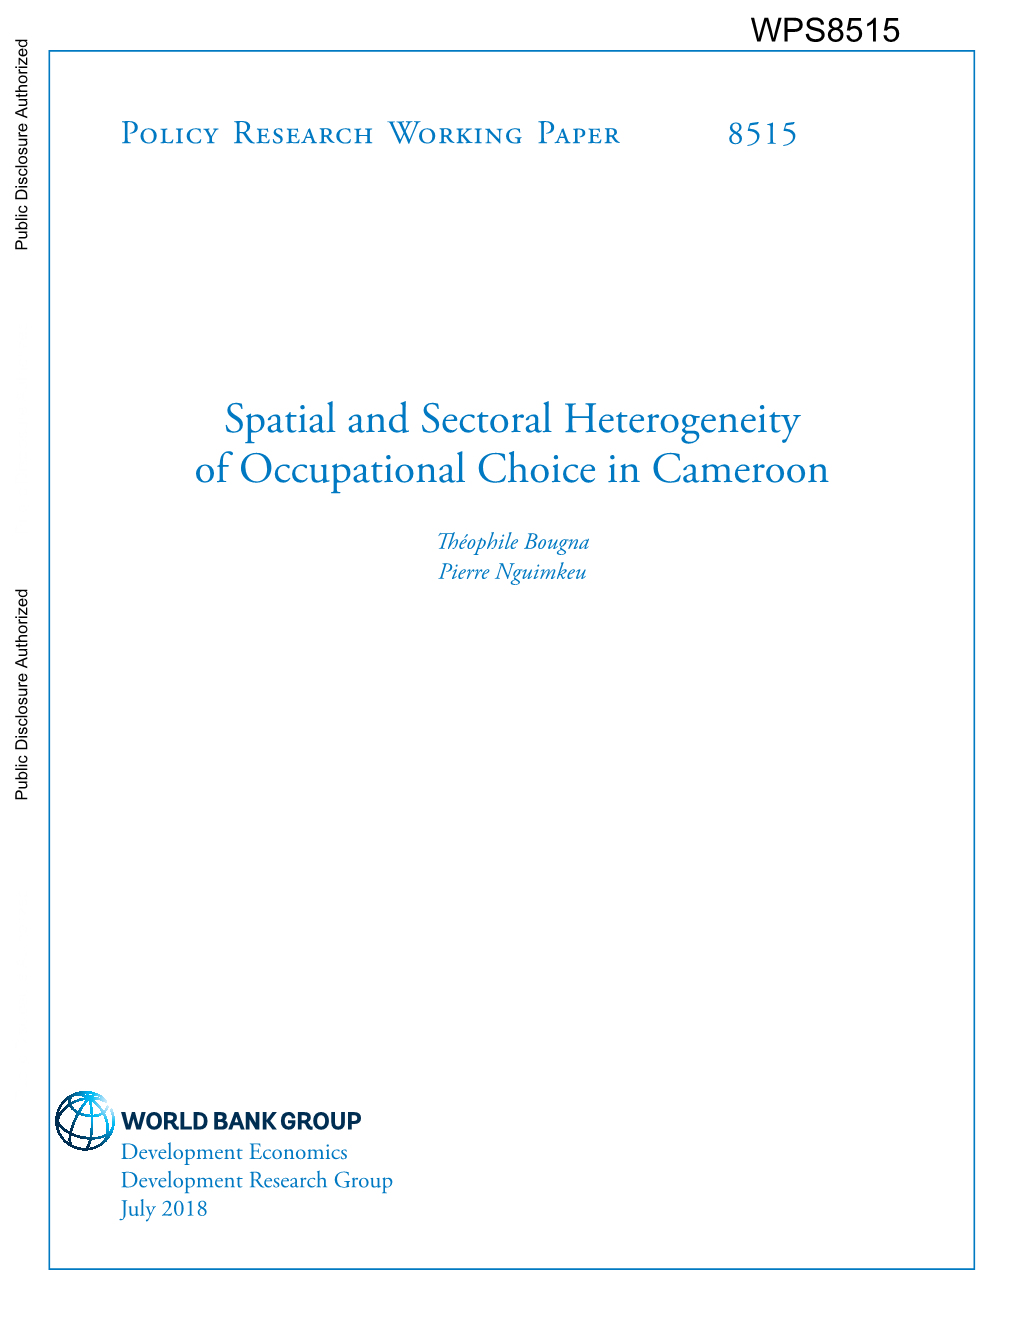 Spatial and Sectoral Heterogeneity of Occupational Choice in Cameroon